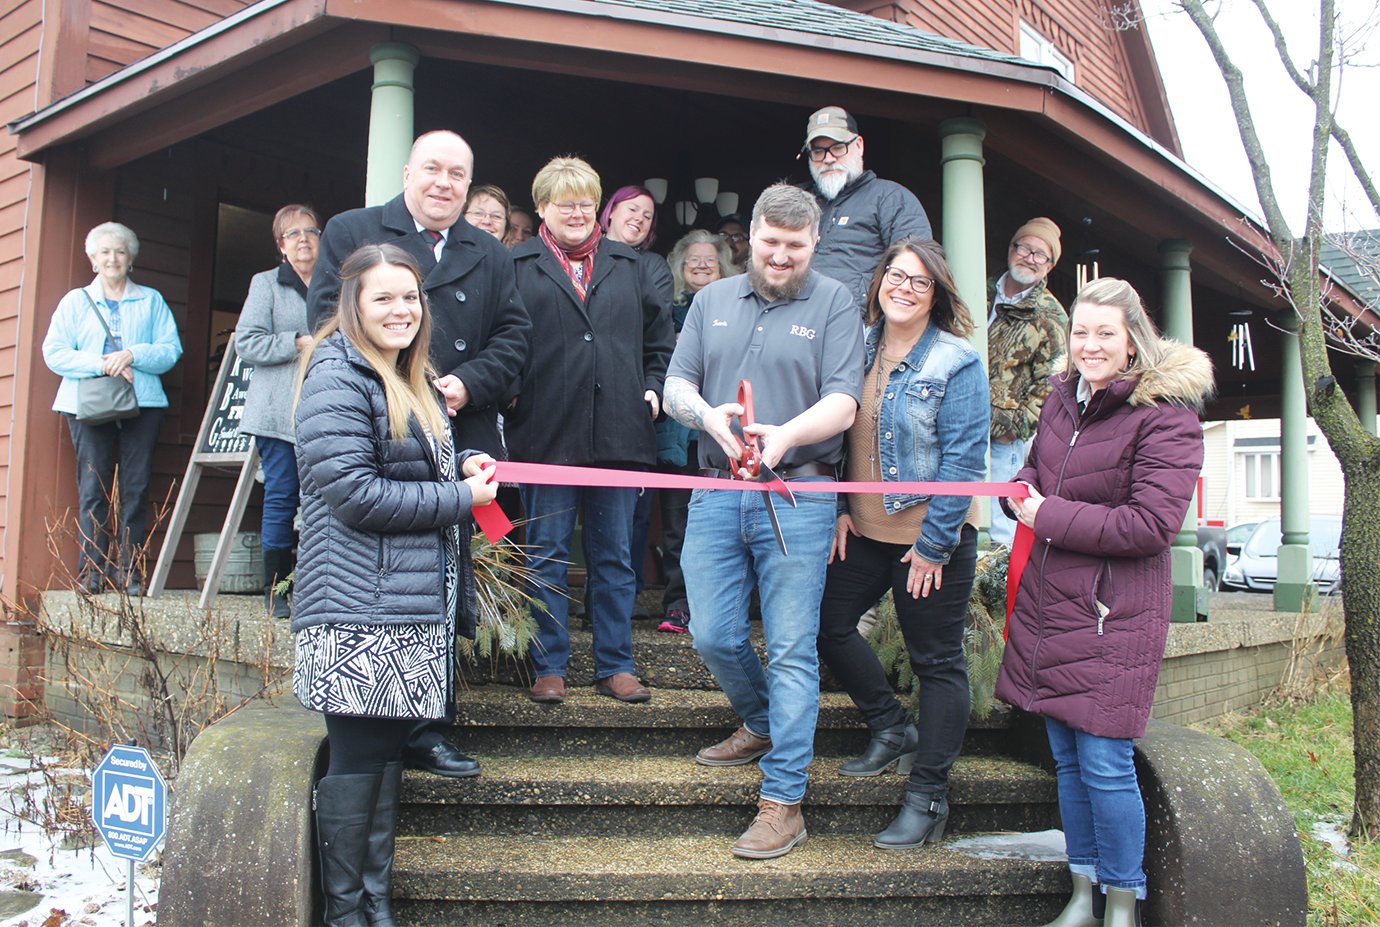 Chamber of Commerce Assistant Director Casey Hockersmith, from left, Mayor Todd Barton, Sue Lucas, Travis Harrington, Jami Harrington and Chamber of Commerce Executive Director Cassie Hagan cut the ribbon at Reclaimed by Grace's new location on Grant Avenue on Monday.